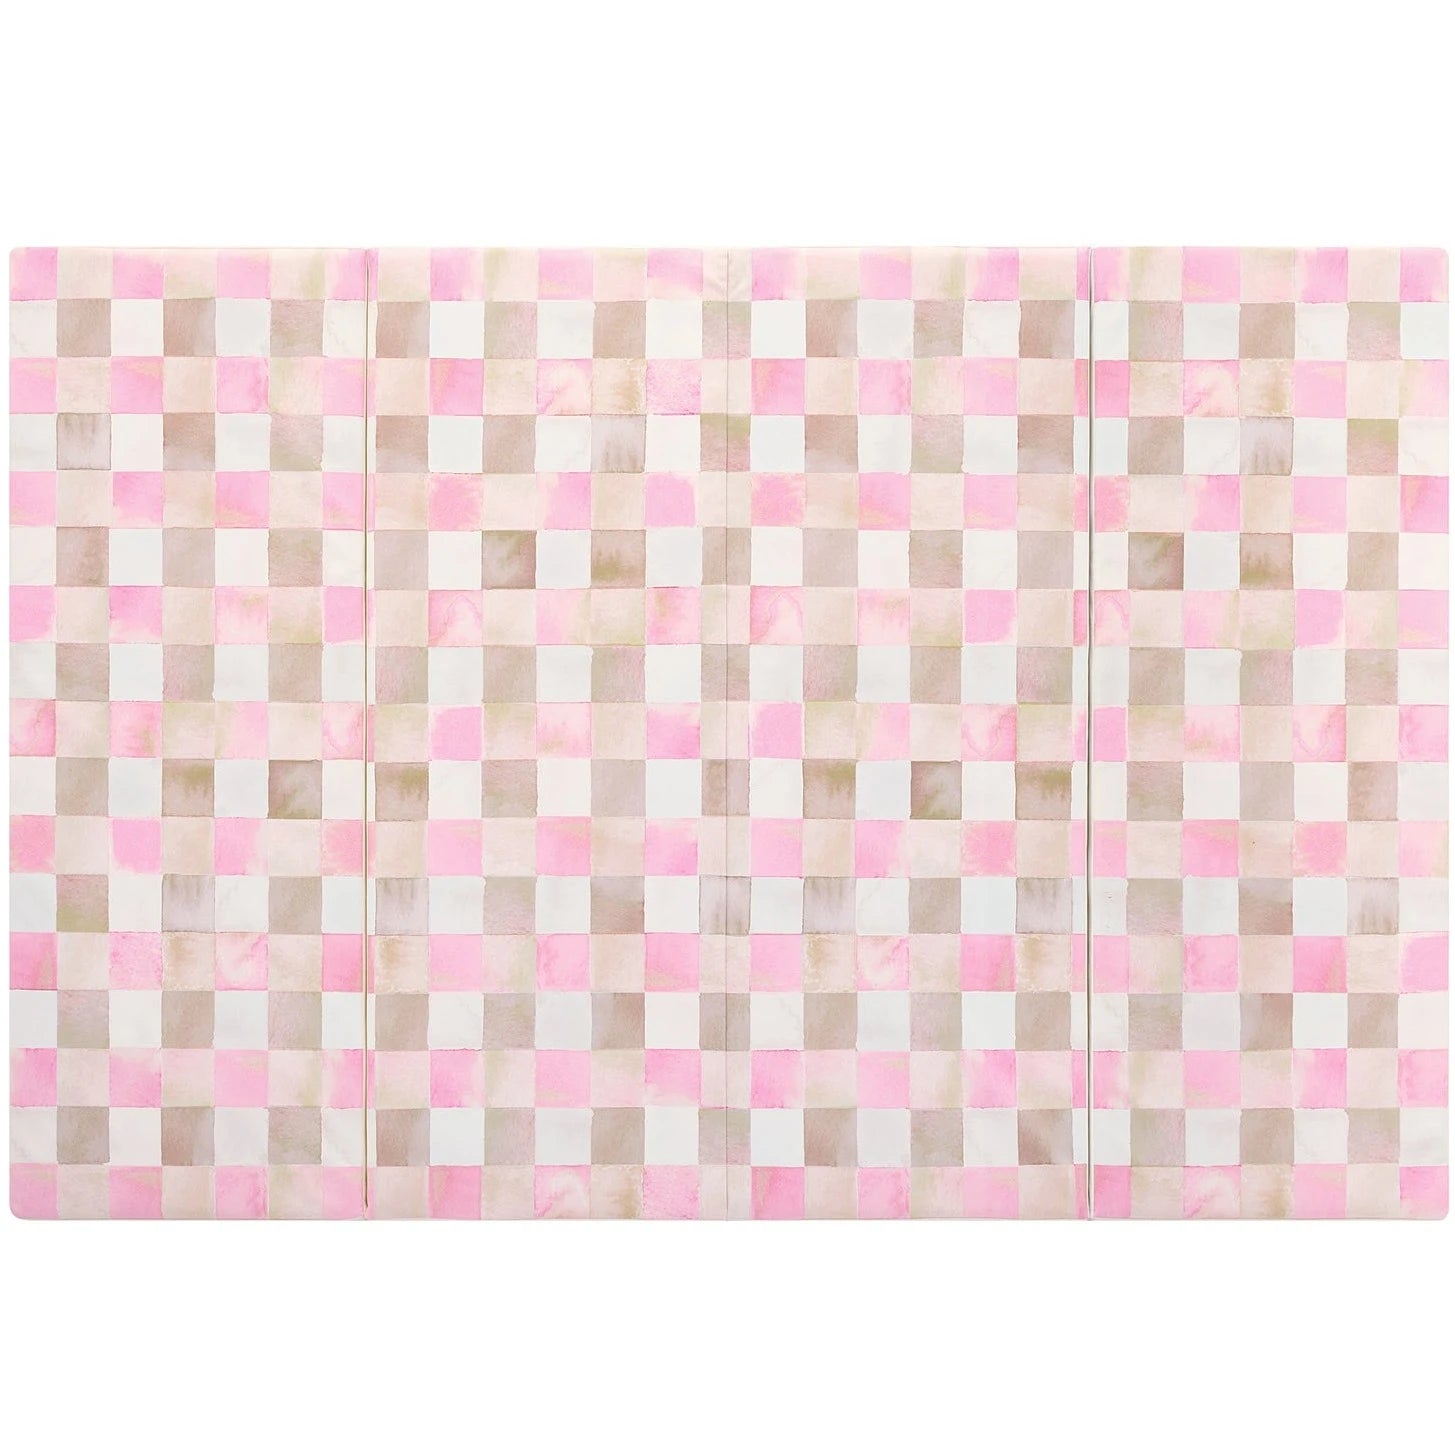 Neapolitan pink and brown gingham print tumbling mat shown in size 4x6